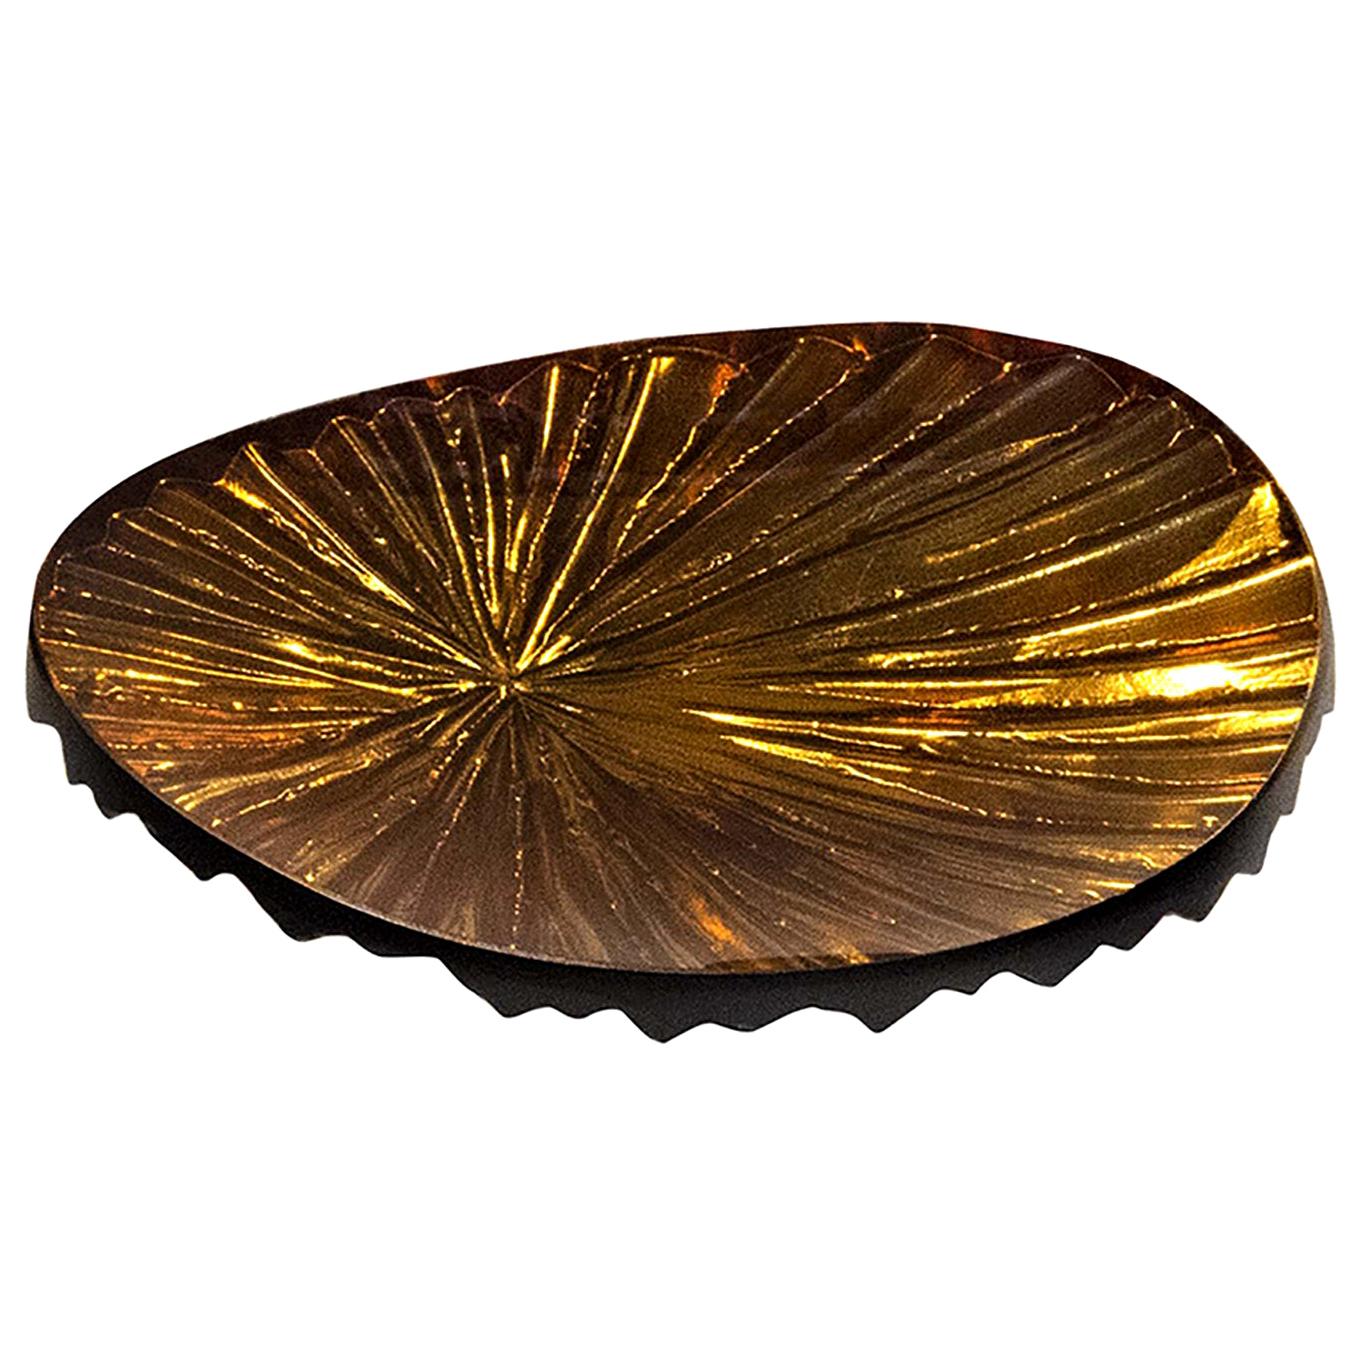 Contemporary by Ghirò Studio 'Oasi' Crystal Bowl Amber and Gold Big Size For Sale